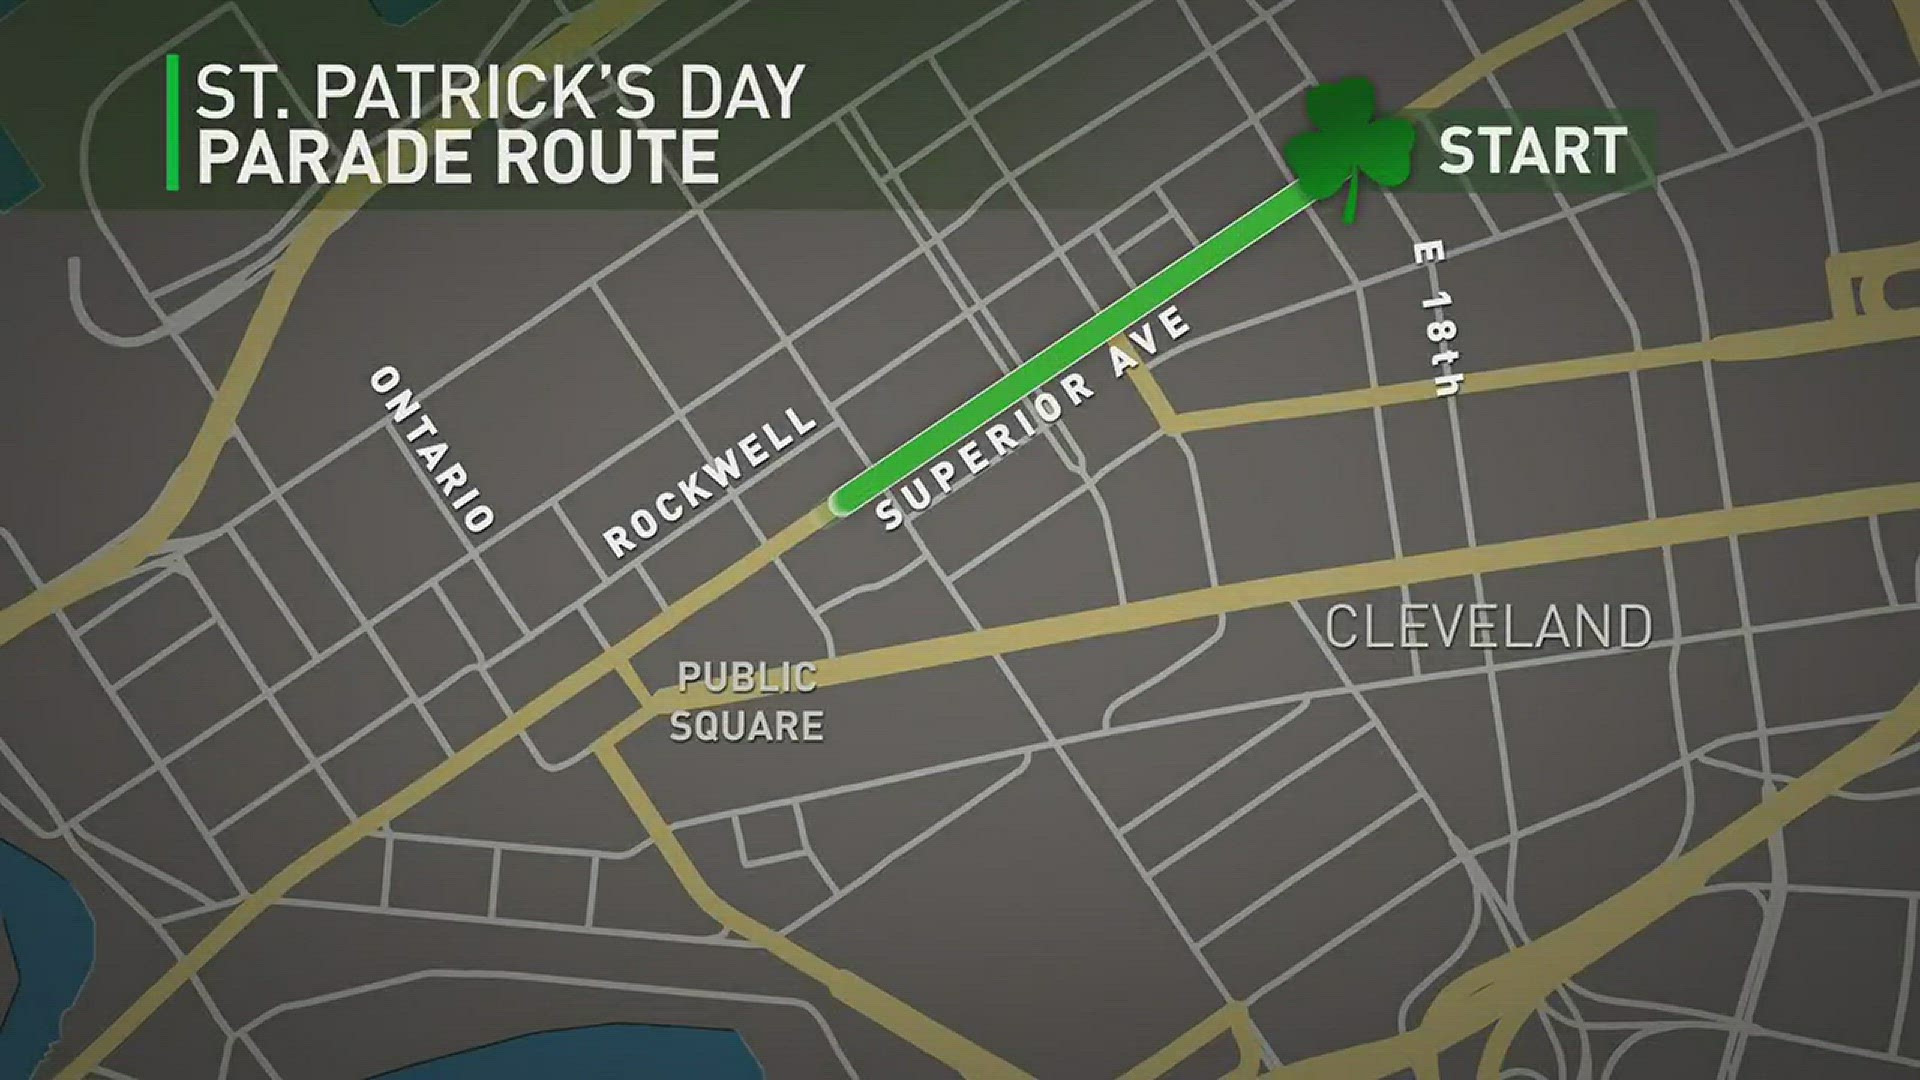 Here's a map of the St. Patrick's Day Parade route (updated)